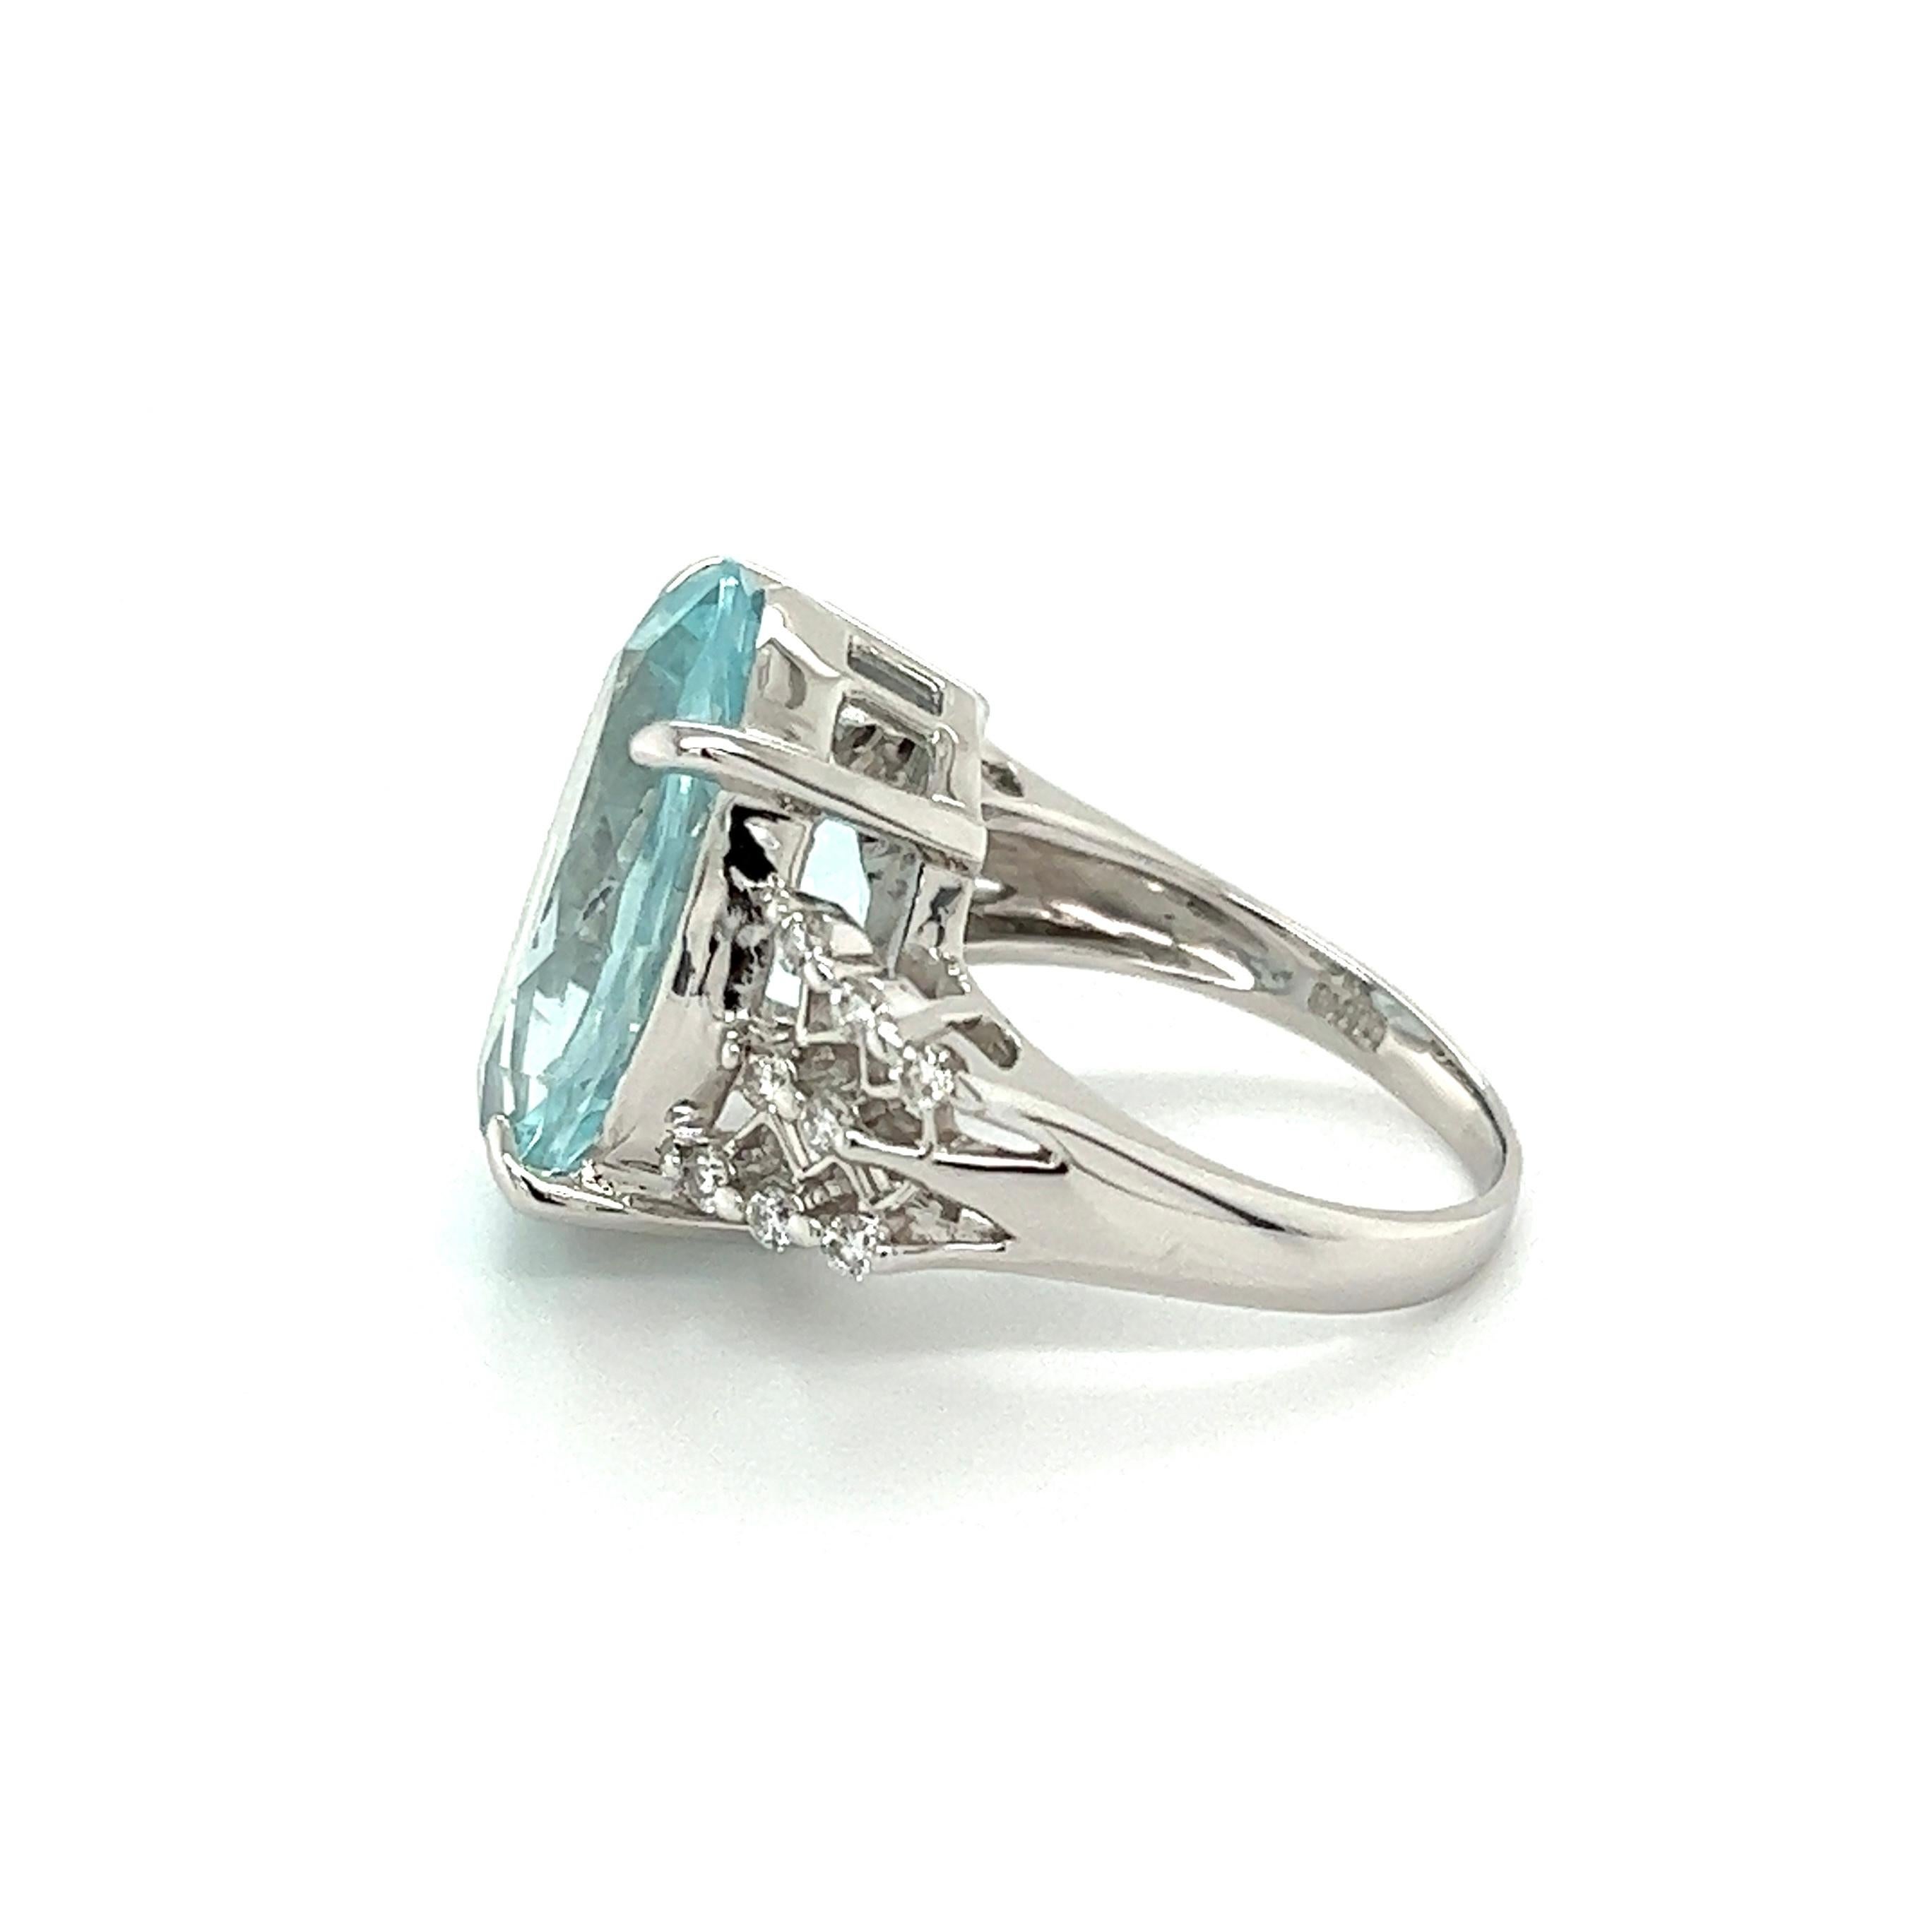 10.21 Carat Oval Aquamarine and Diamond Platinum Ring Estate Fine Jewelry In Excellent Condition For Sale In Montreal, QC